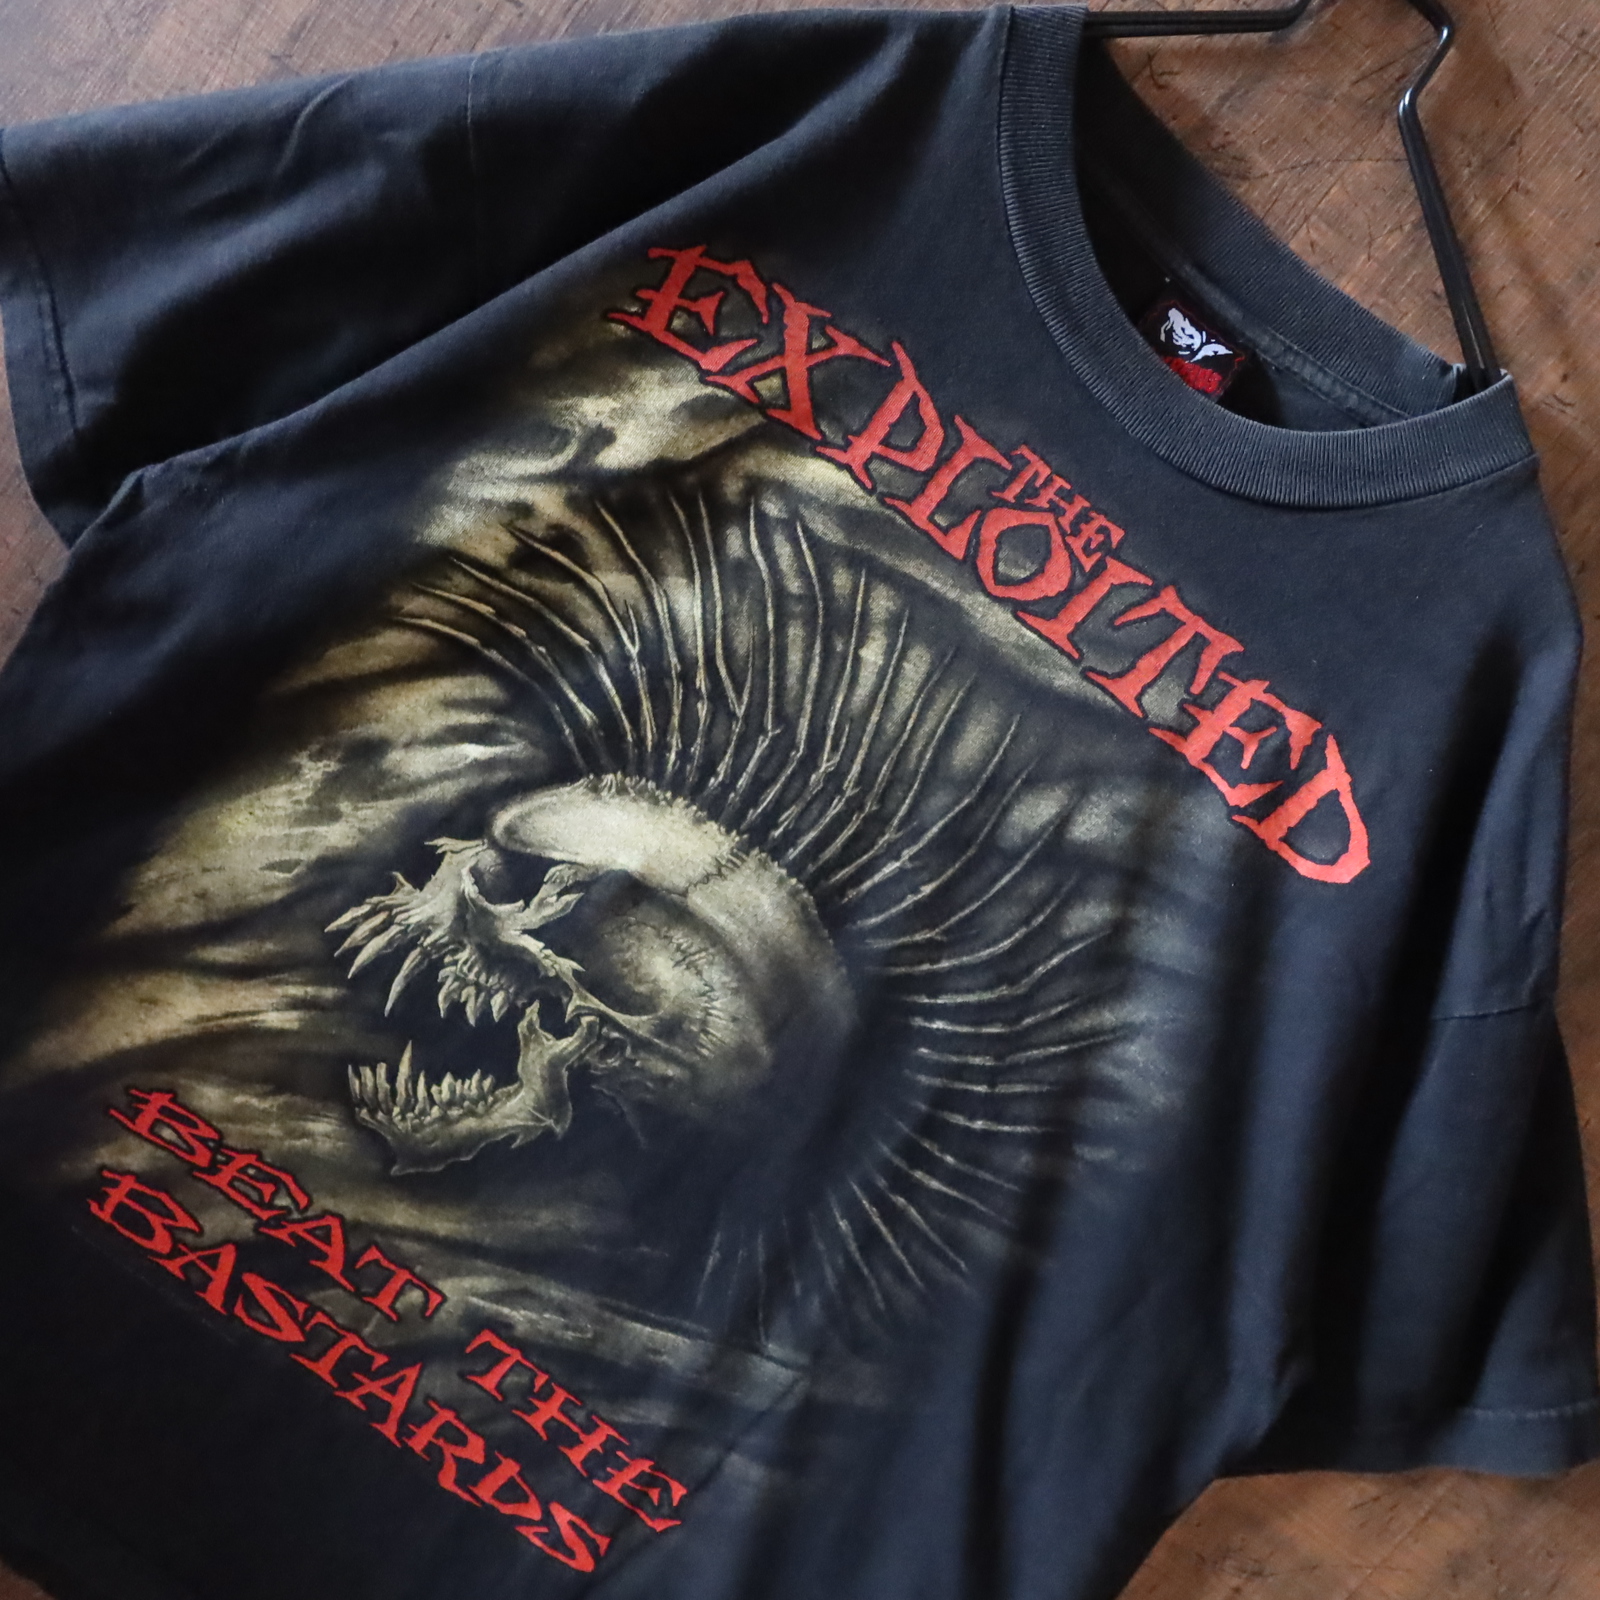 90s Vintage US古着 THE EXPLOITED エクスプロイテッド 両面